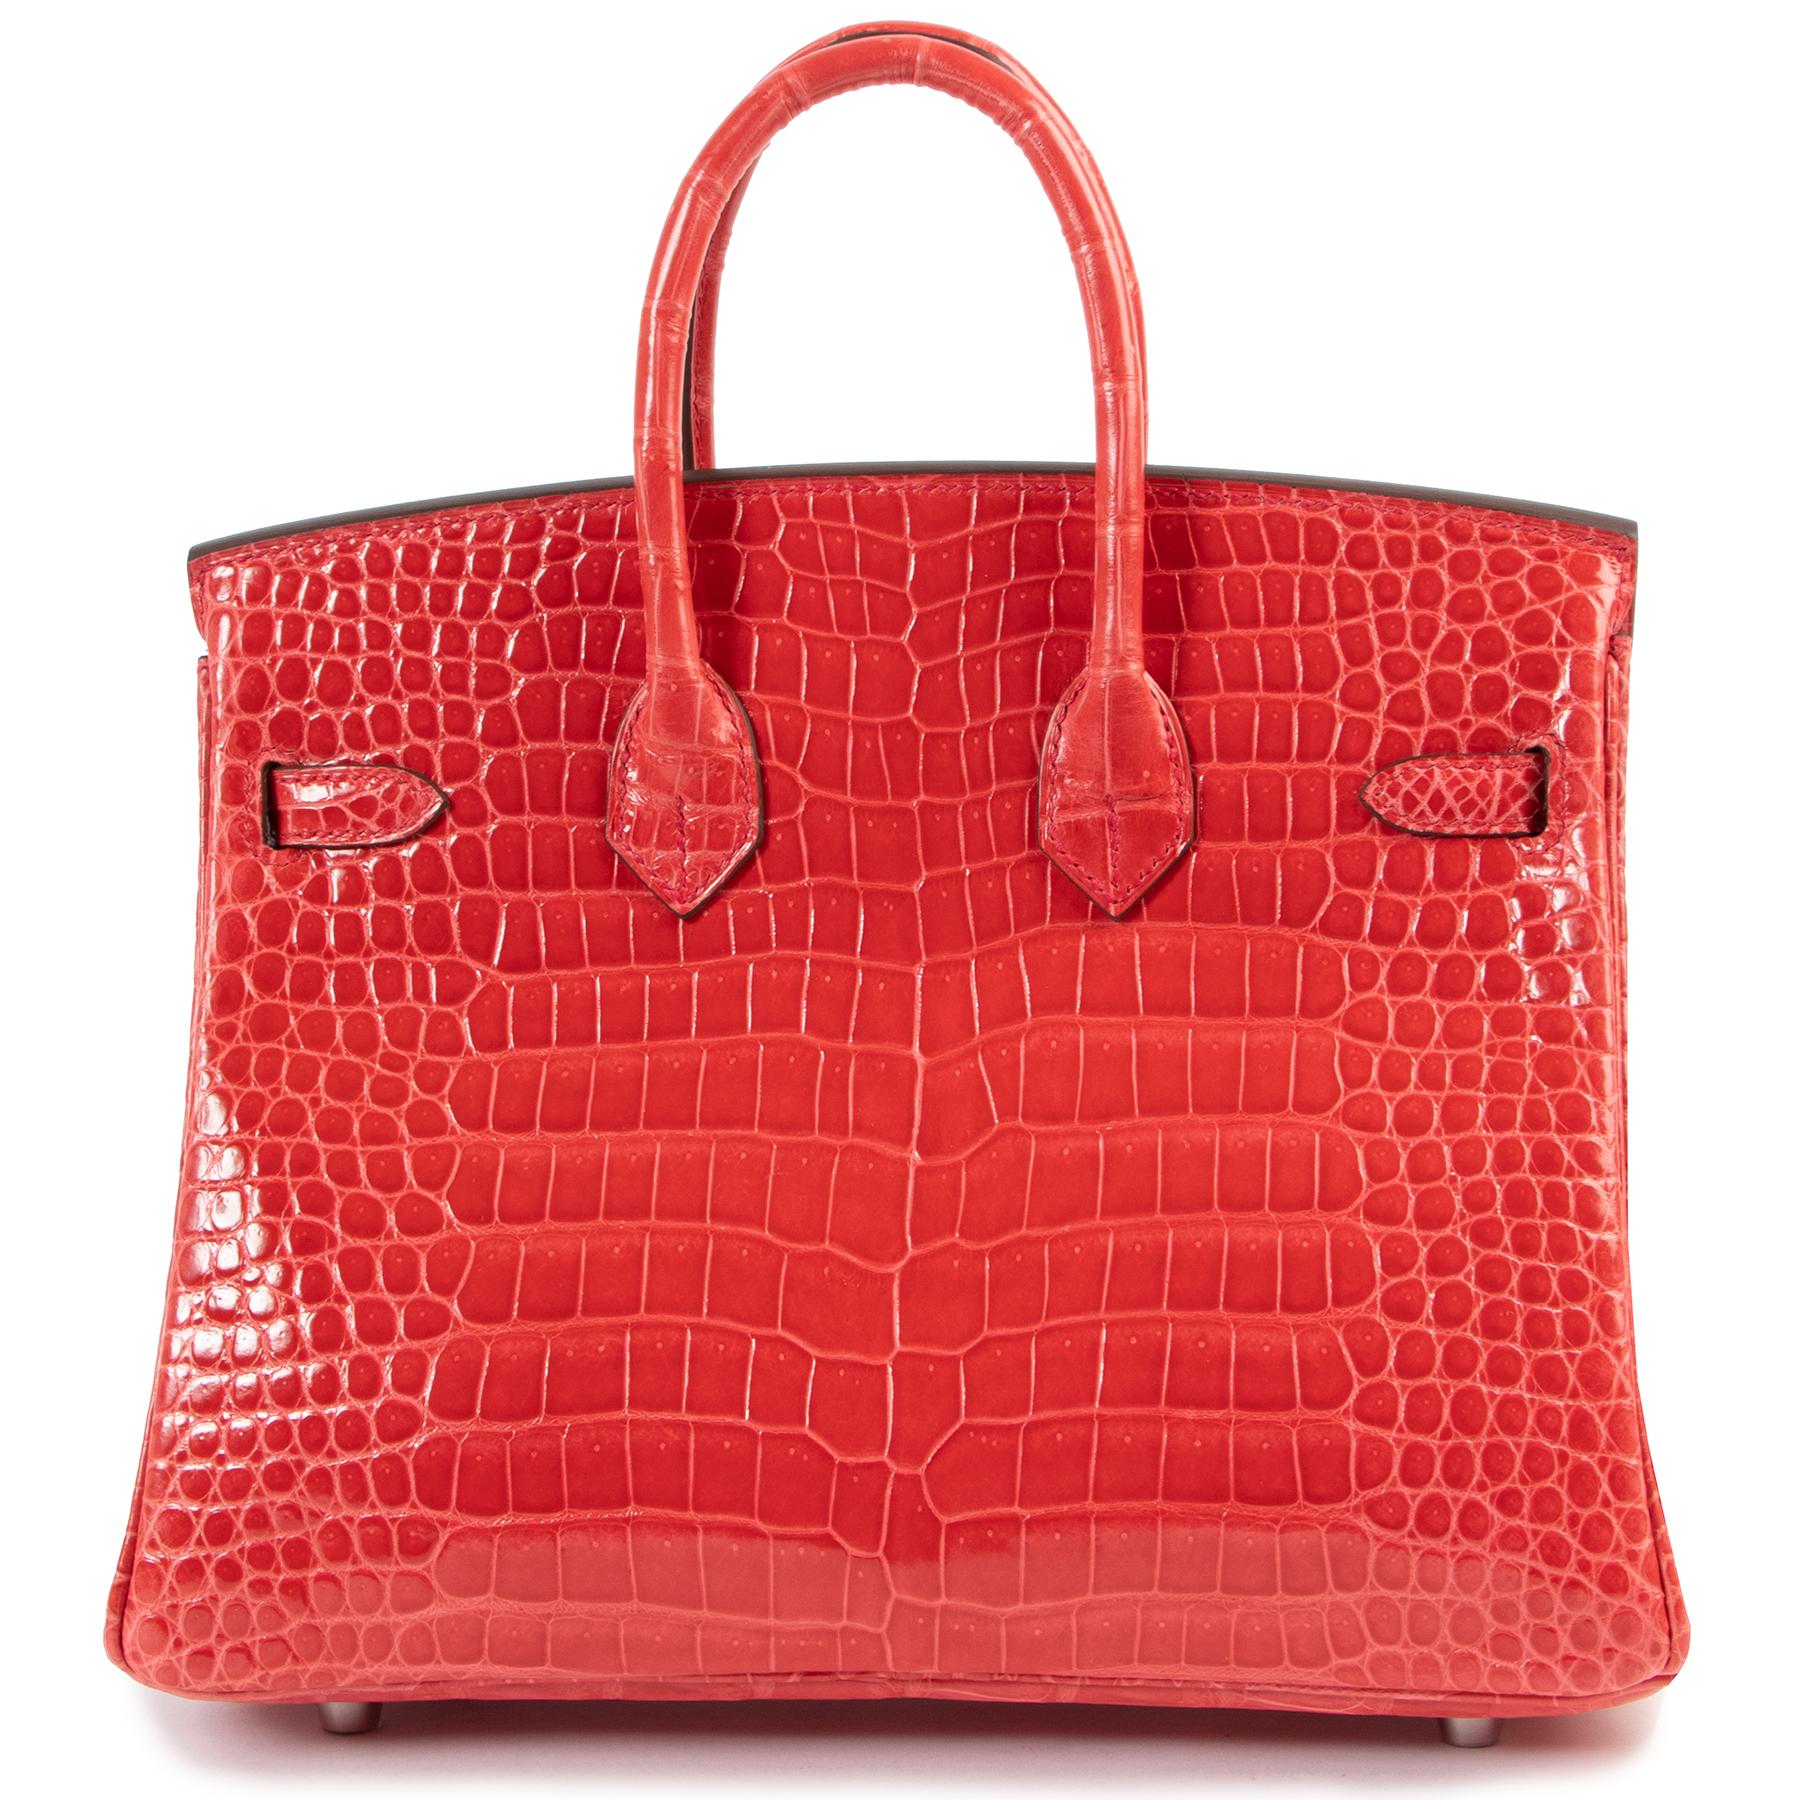 This VERY RARE & WANTED  Birkin is a real COLLECTOR'S ITEM.  
It comes in the very hard to find bourgainvillier color, which is a stunning cool red tone  and is made out of Porosus crocodile skin. Porosus is know for its scales which are smaller and